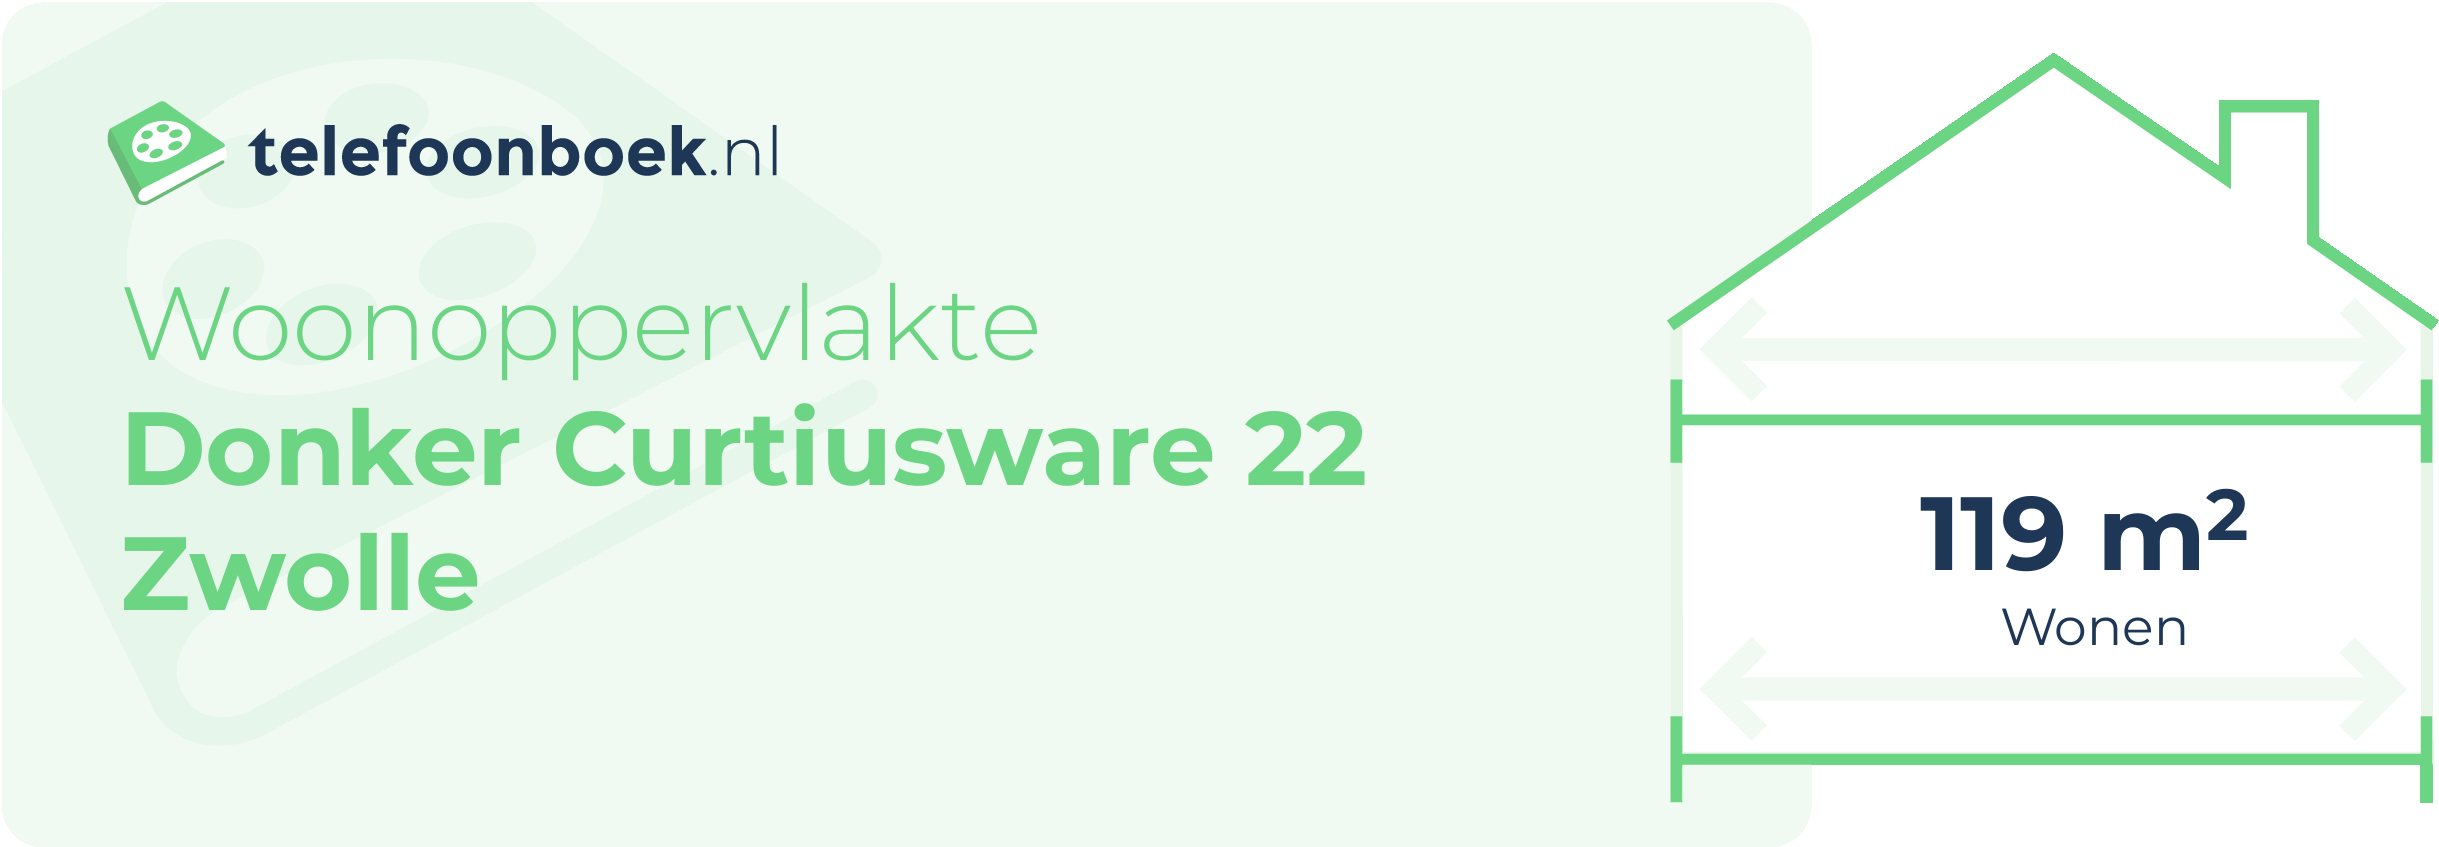 Woonoppervlakte Donker Curtiusware 22 Zwolle